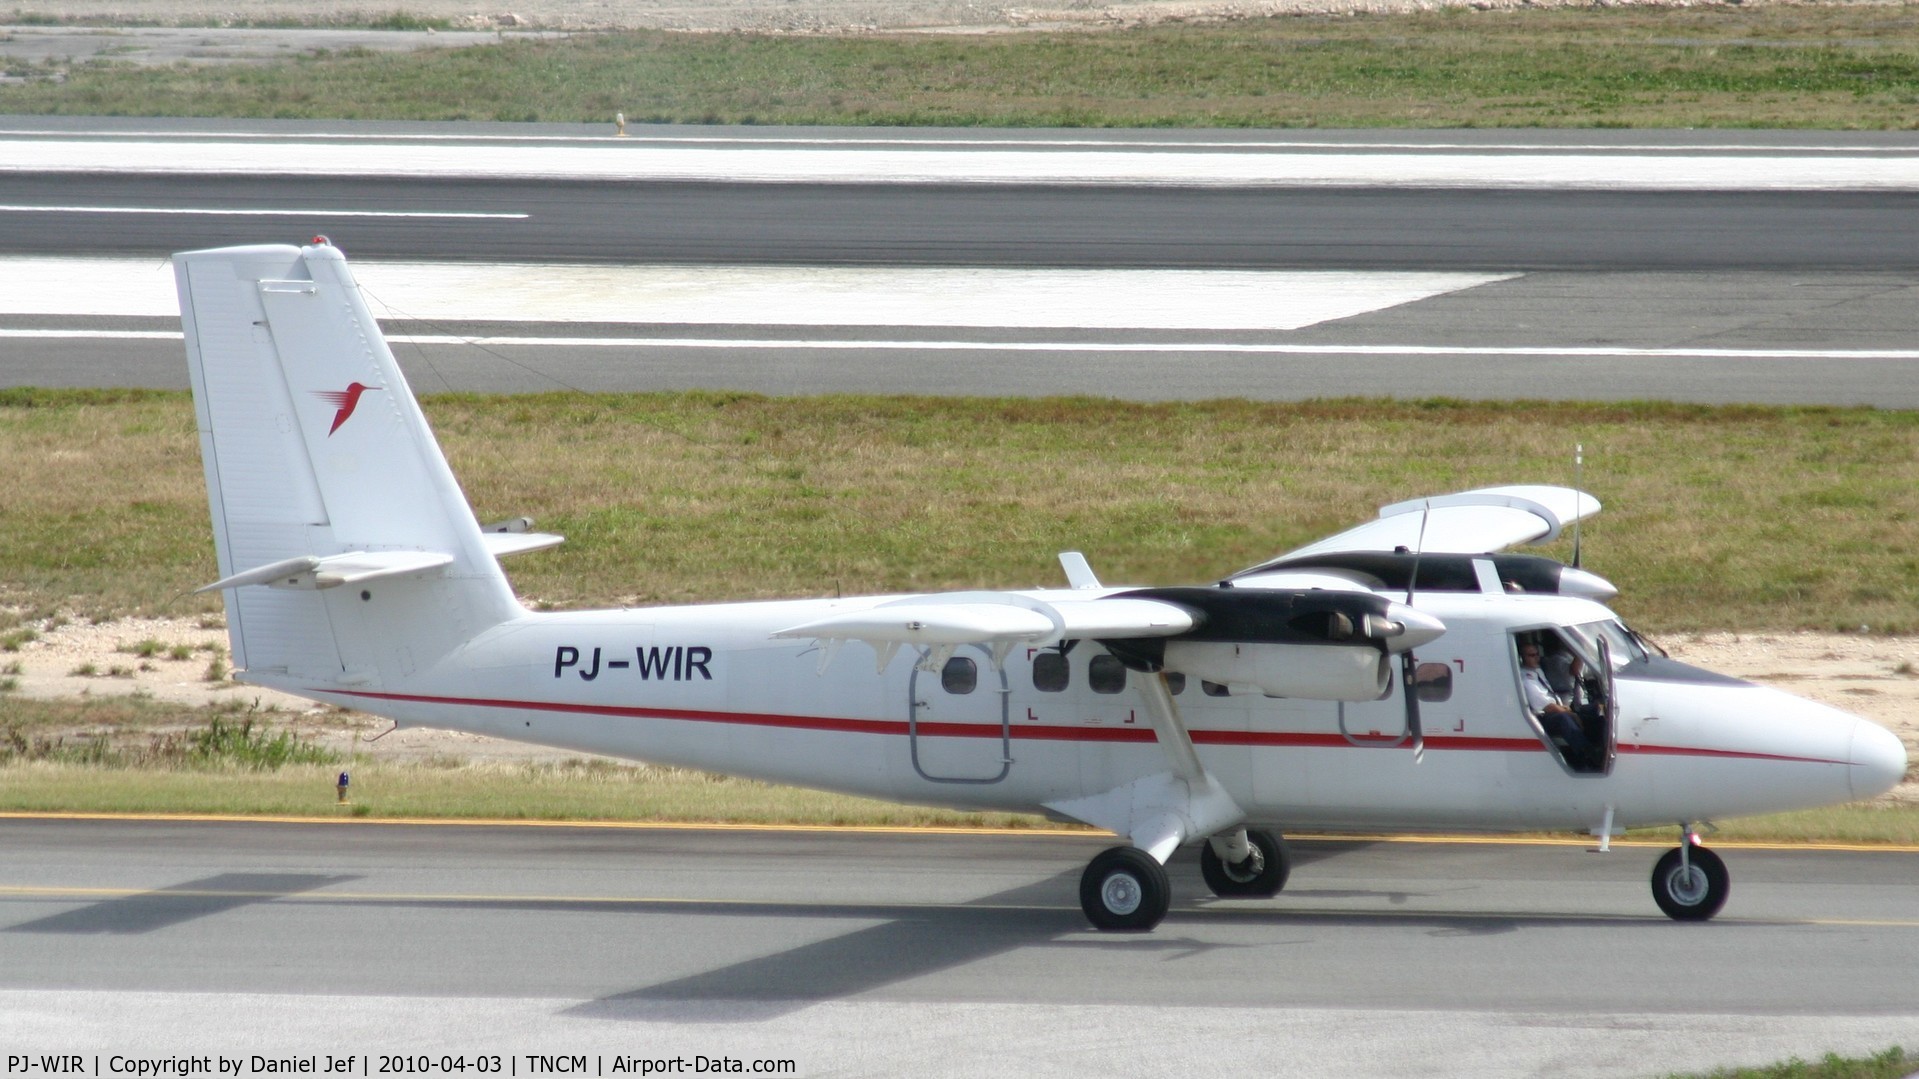 PJ-WIR, 1975 De Havilland Canada DHC-6-300 Twin Otter C/N 476, Winair PJ-WIR taxing to the active for take off from TNCM